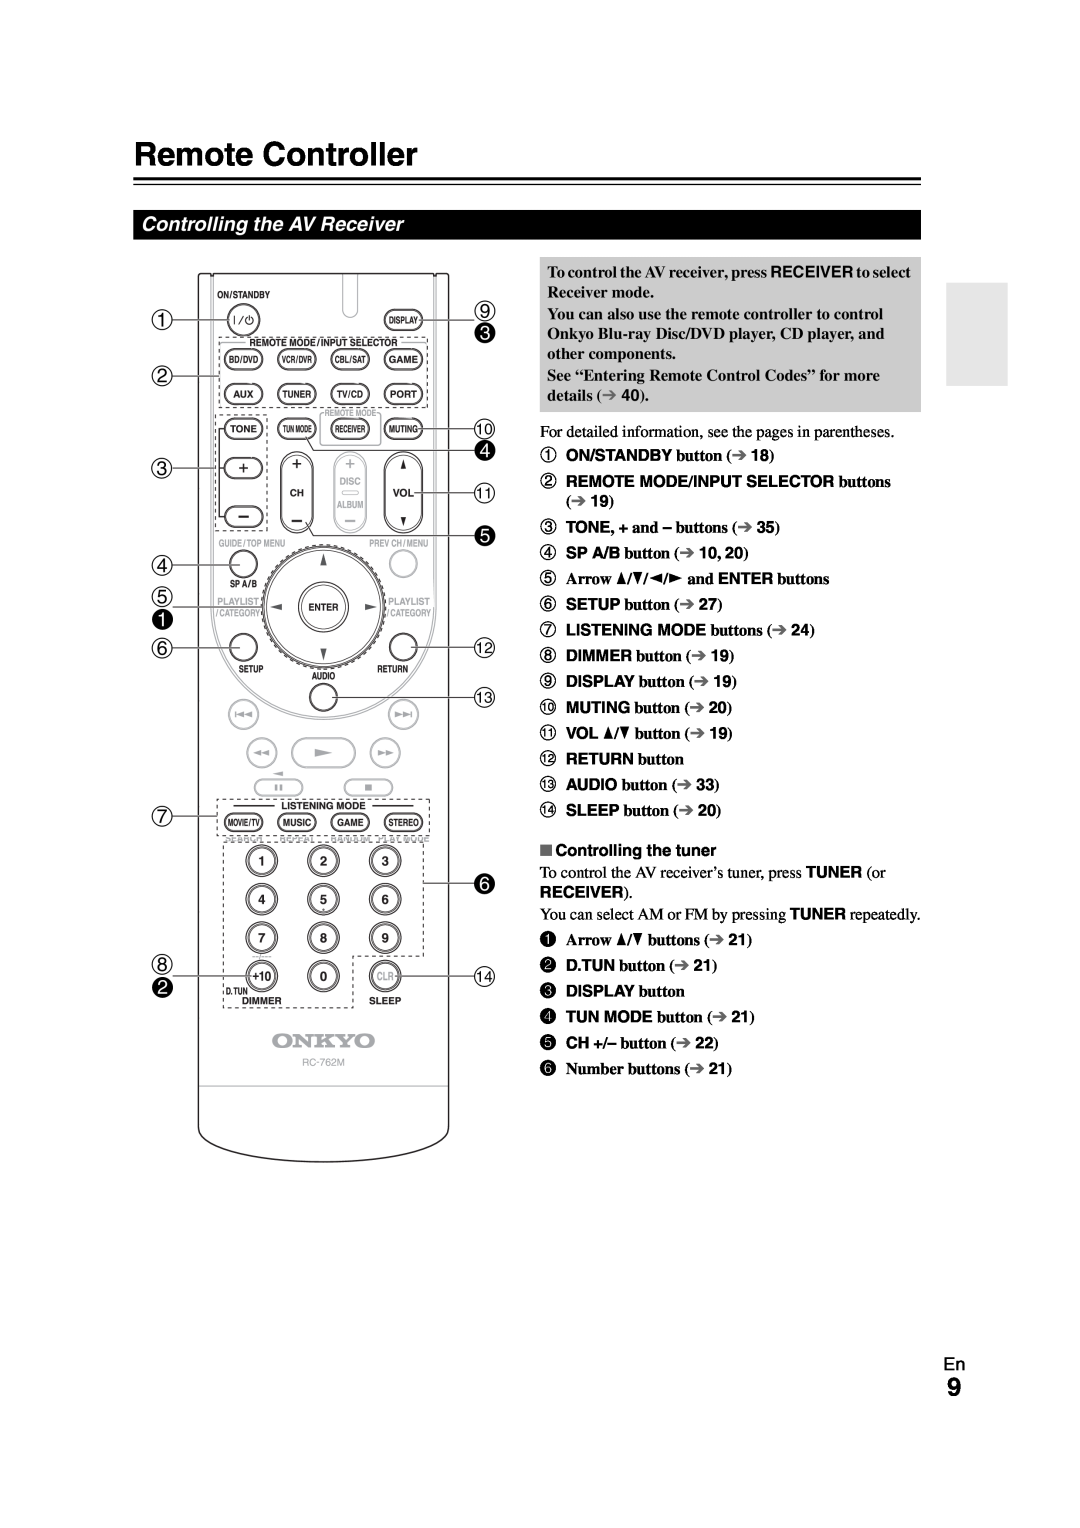 Onkyo 29400468 instruction manual Remote Controller 